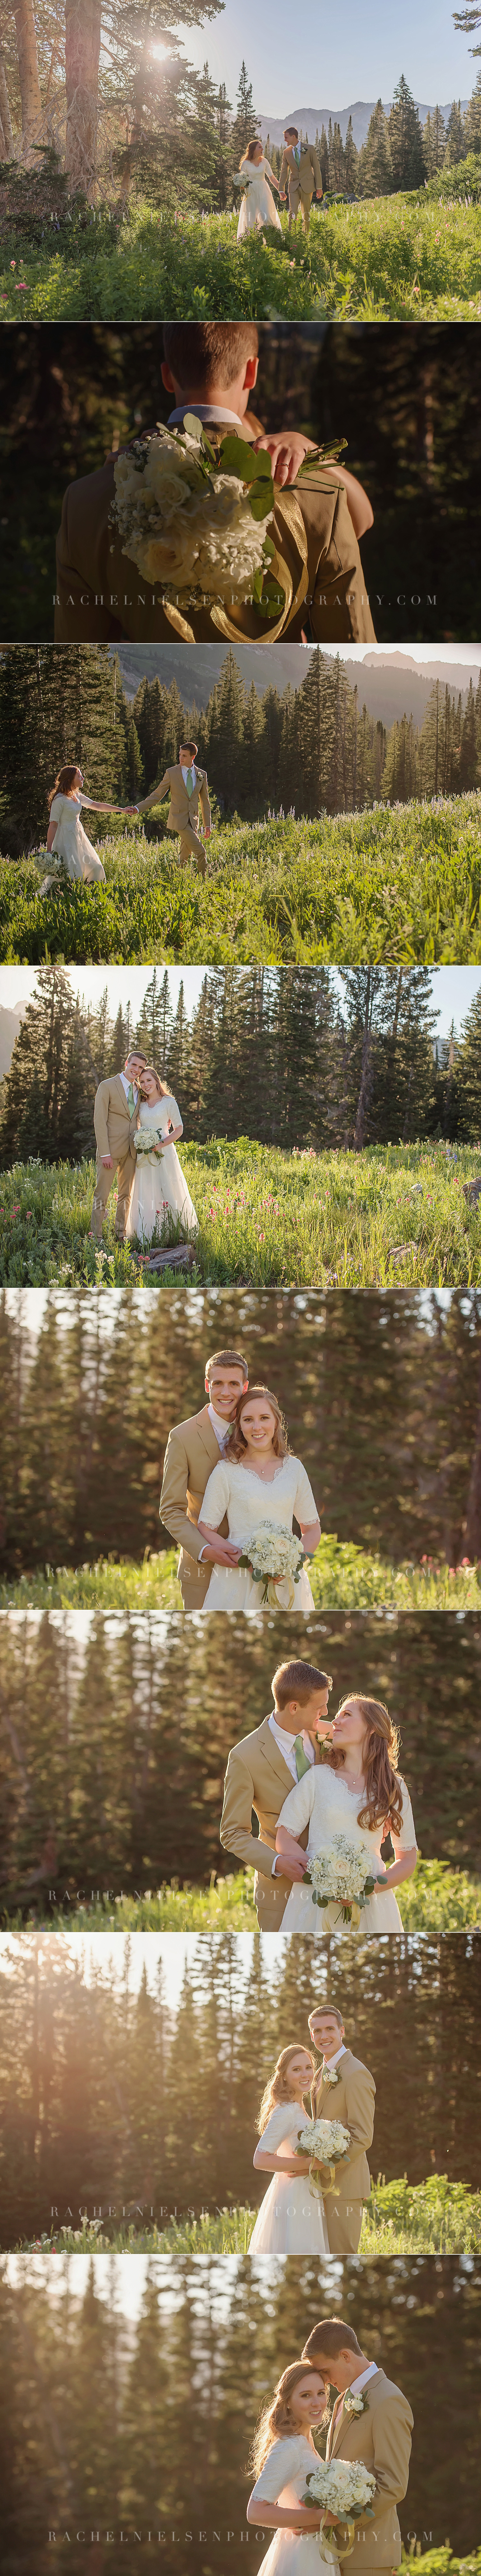 Albion-Basin-Bride-and-Groom-3